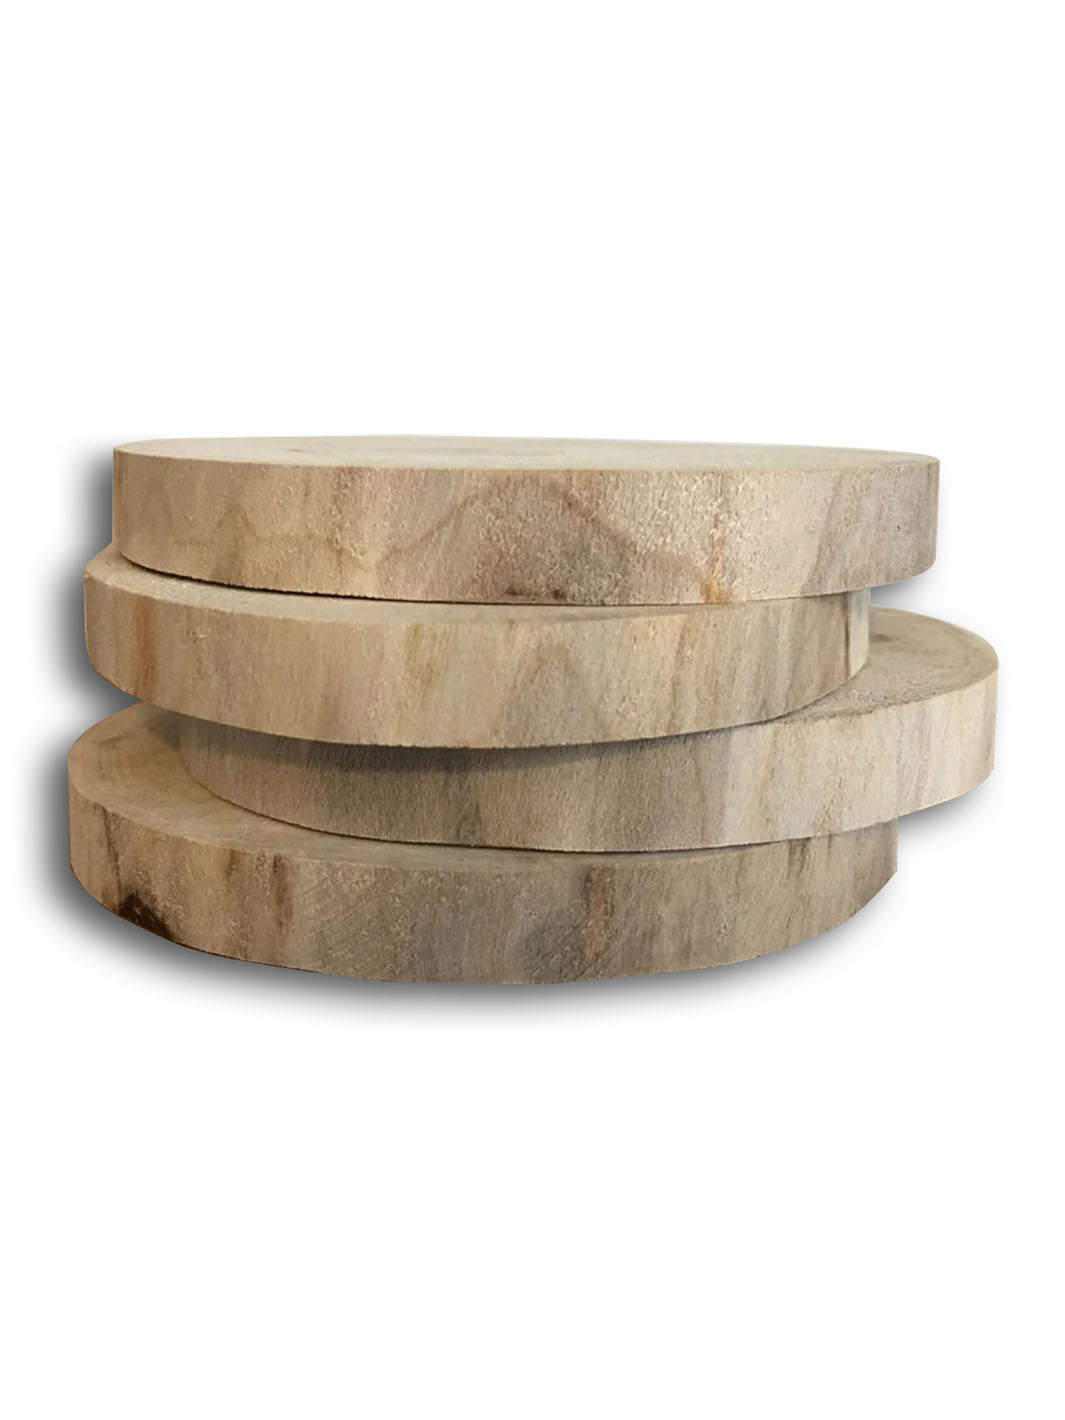 Handcrafted Naturally Raw Driftwood Coasters Set FTN Coasters FTN0063